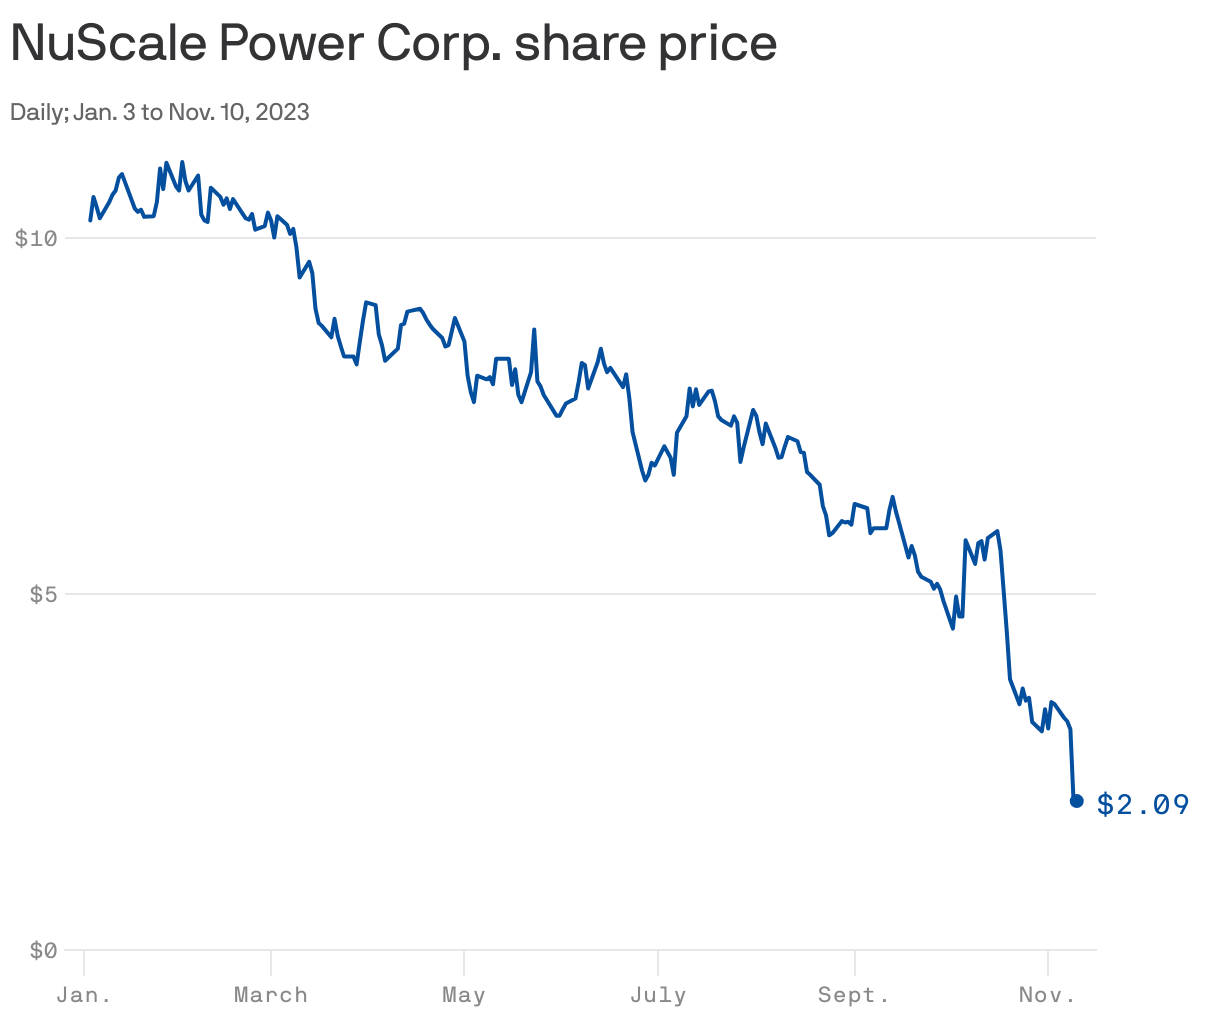 NuScale Power Corp. share price